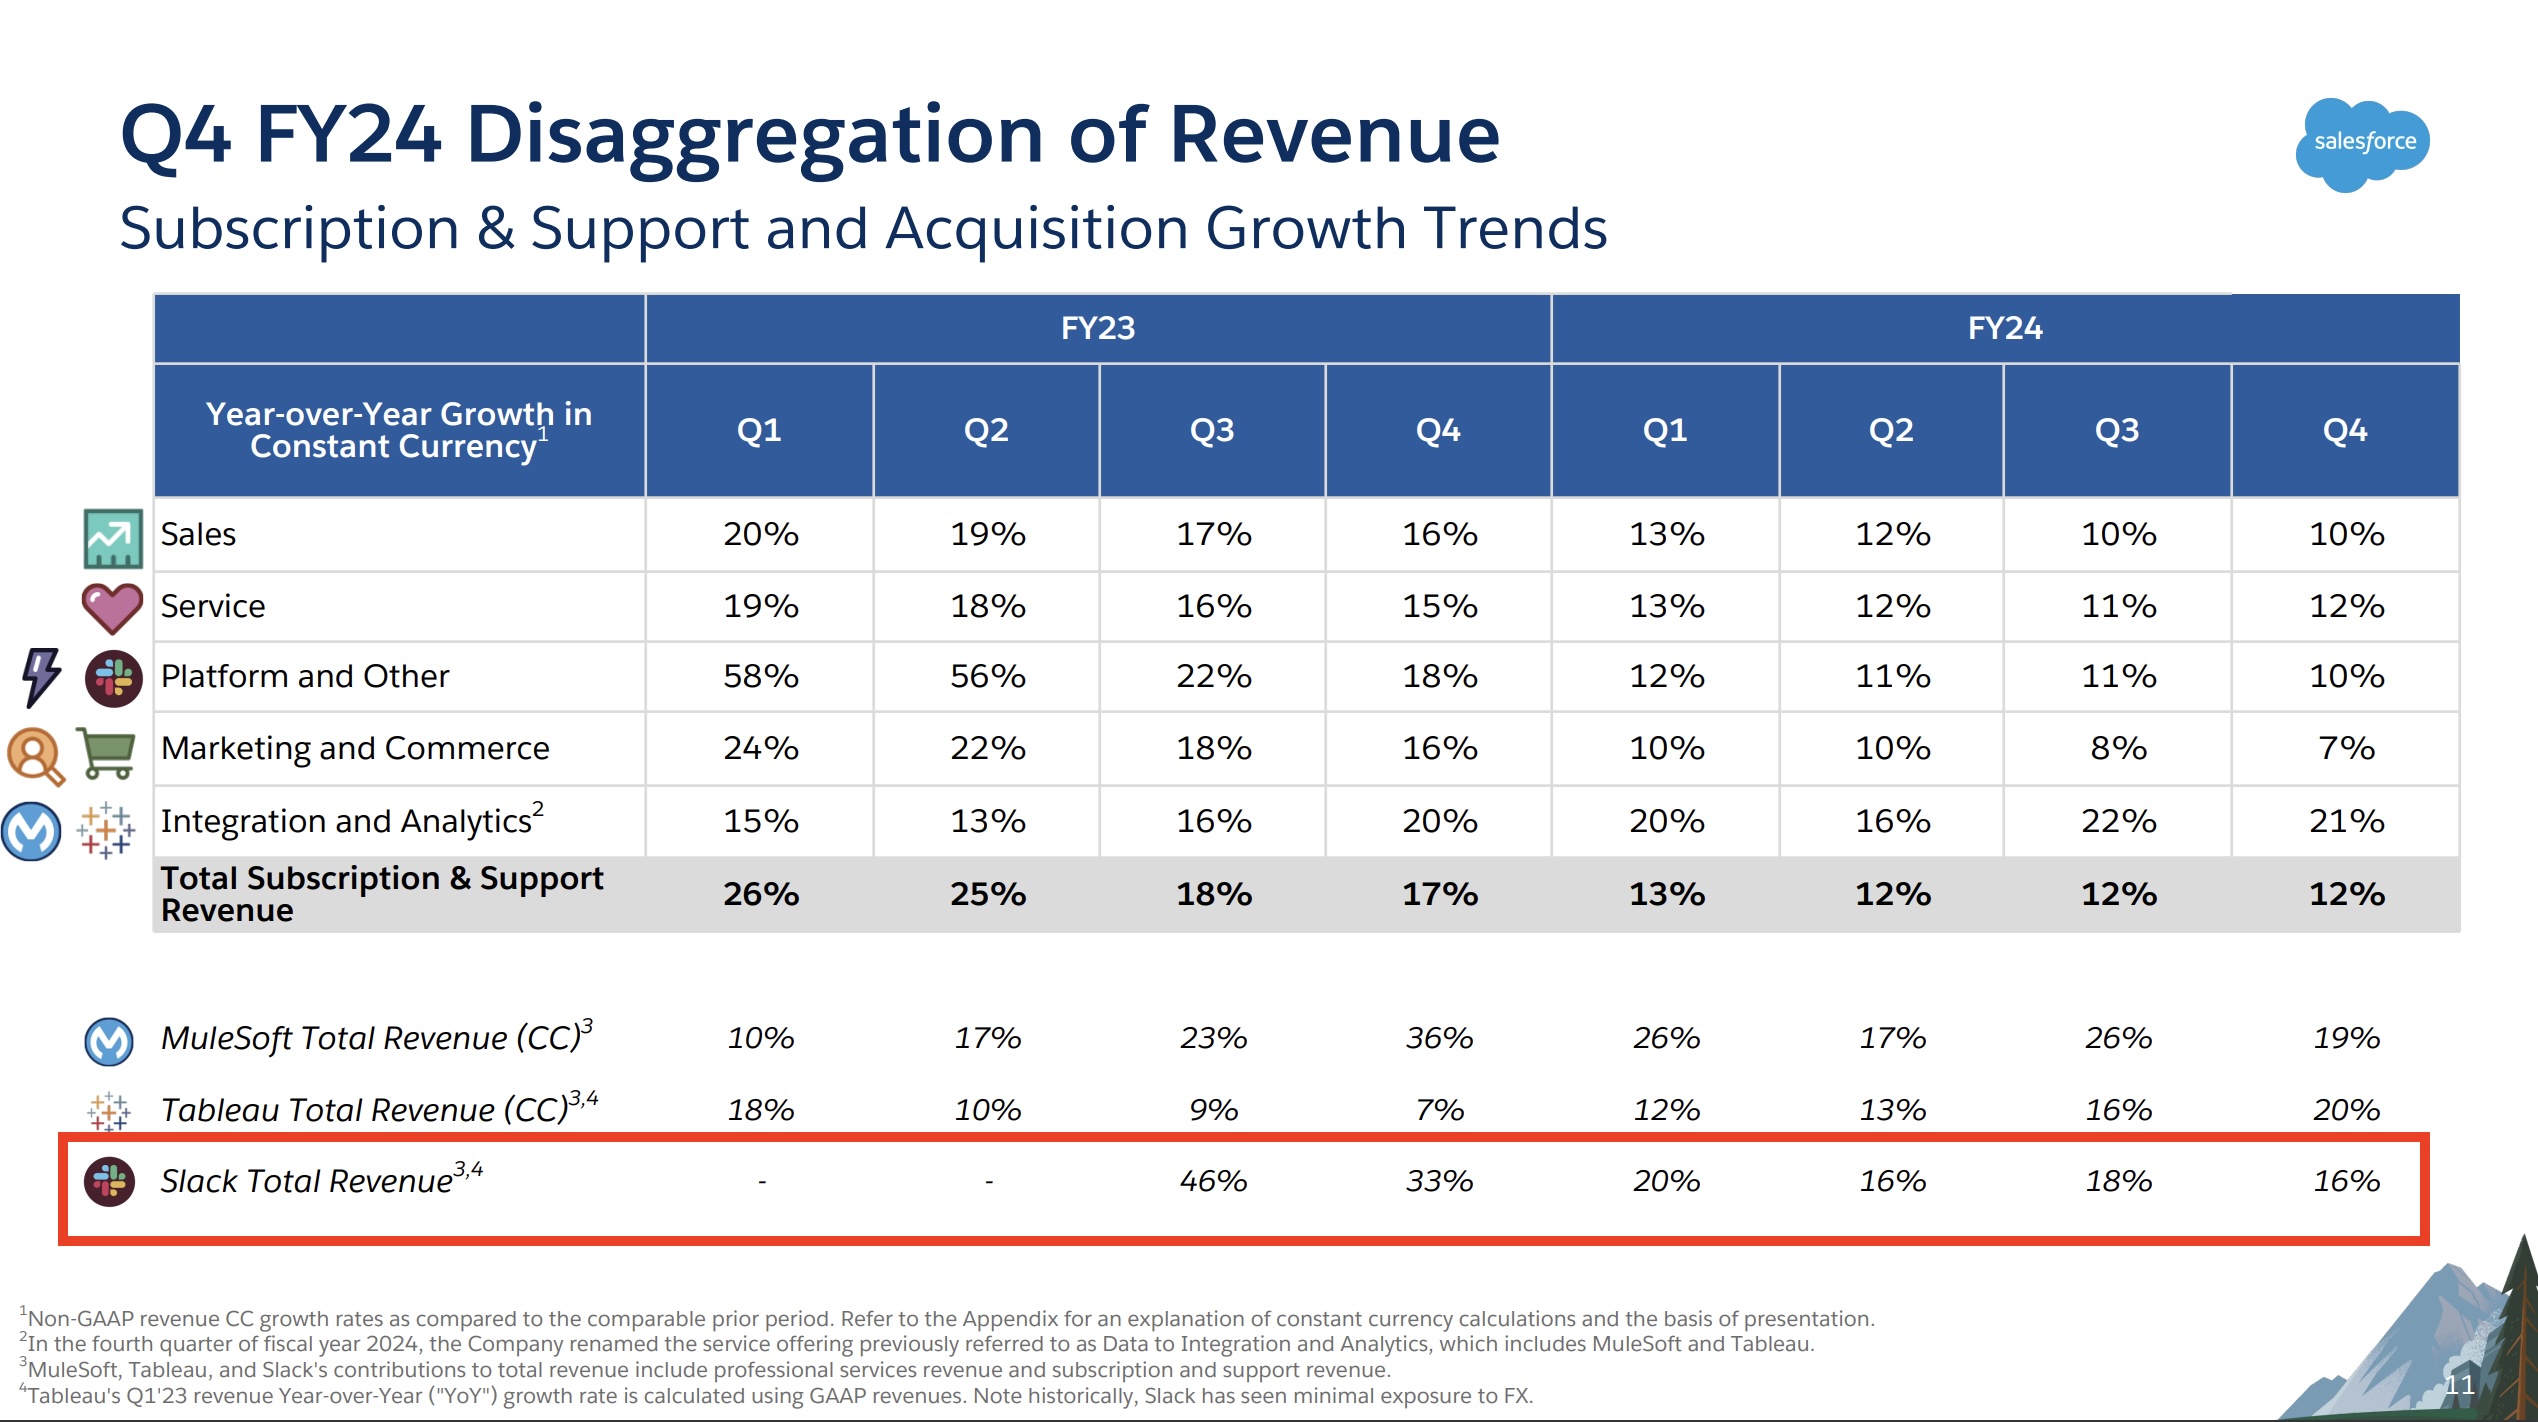 Salesforce slide from Q42024 earnings report presentation showing Slack growth dropping from 46% to 33% to 20% to 16% to 18% and back to 15% from Q32023 to Q42024.